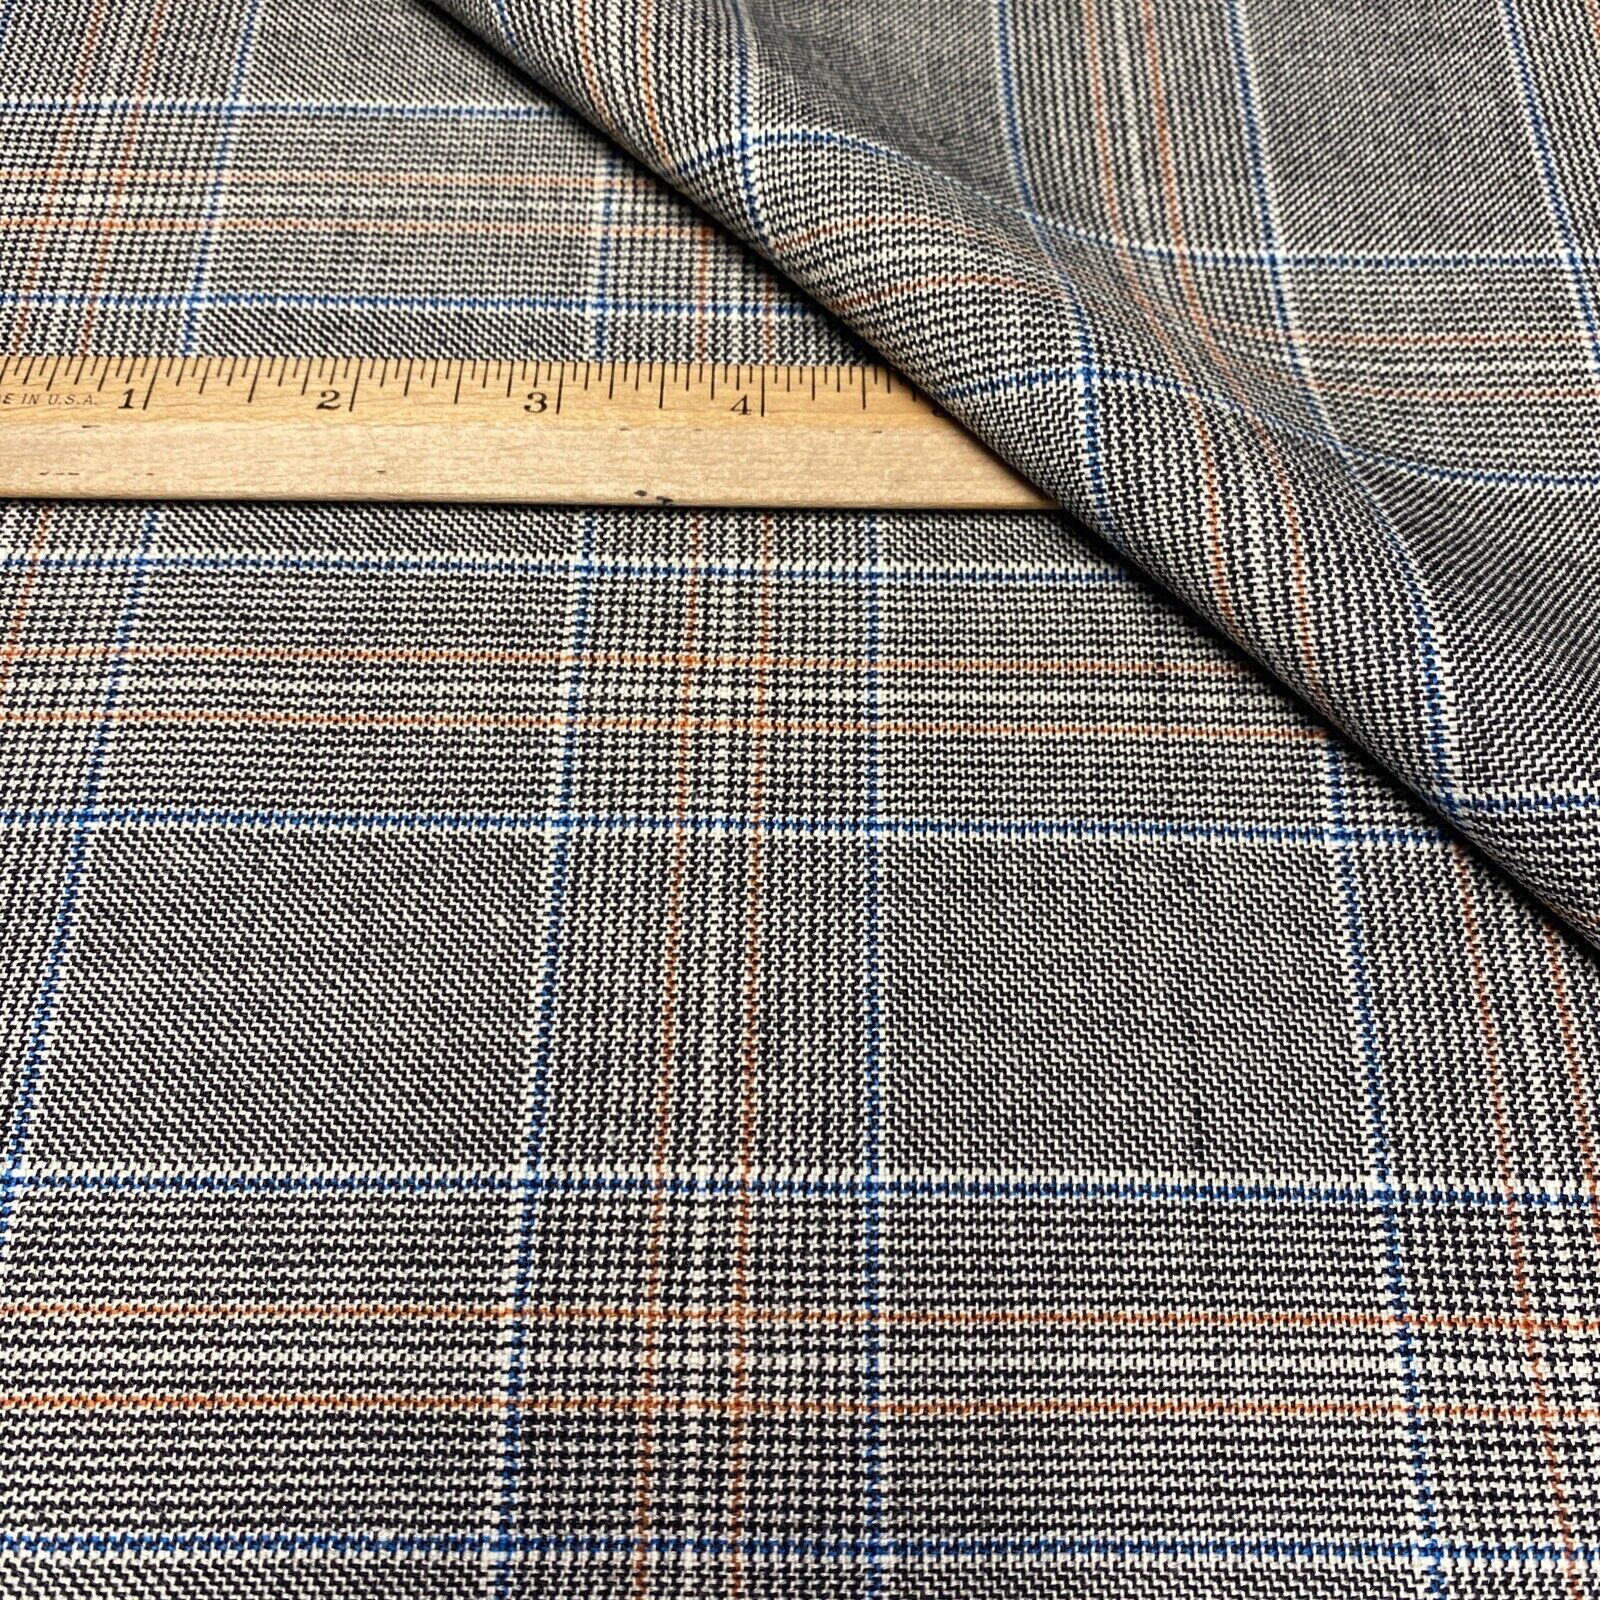 Rare Vintage High End Luxury Bespoke Wool Plaid Suiting Fabric Lot Yards = 1.44